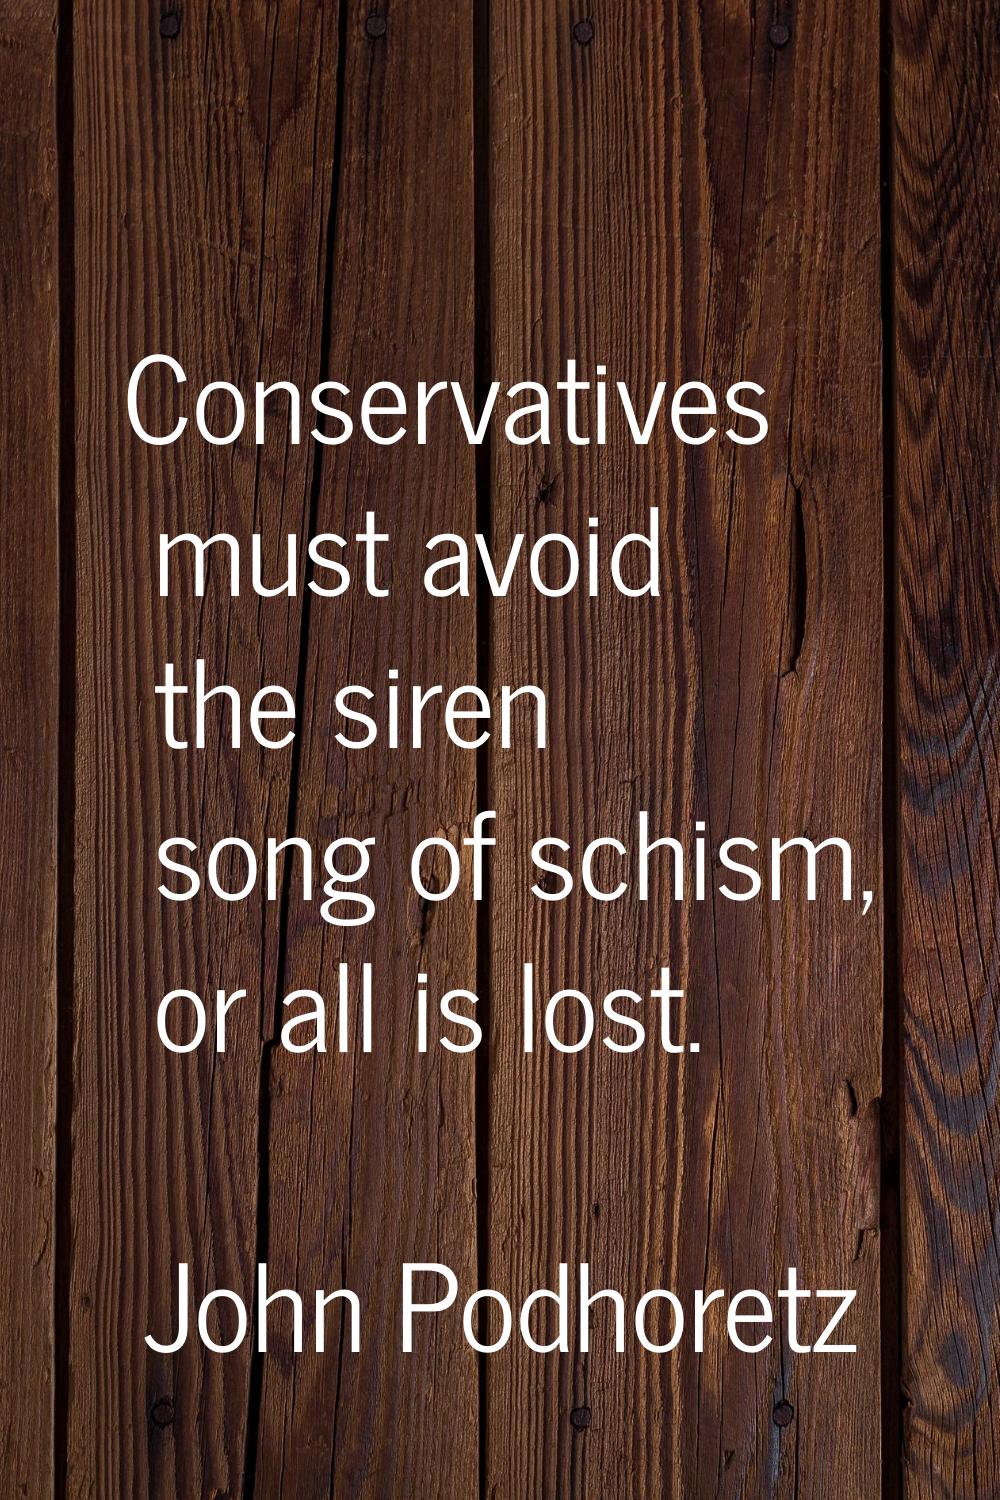 Conservatives must avoid the siren song of schism, or all is lost.